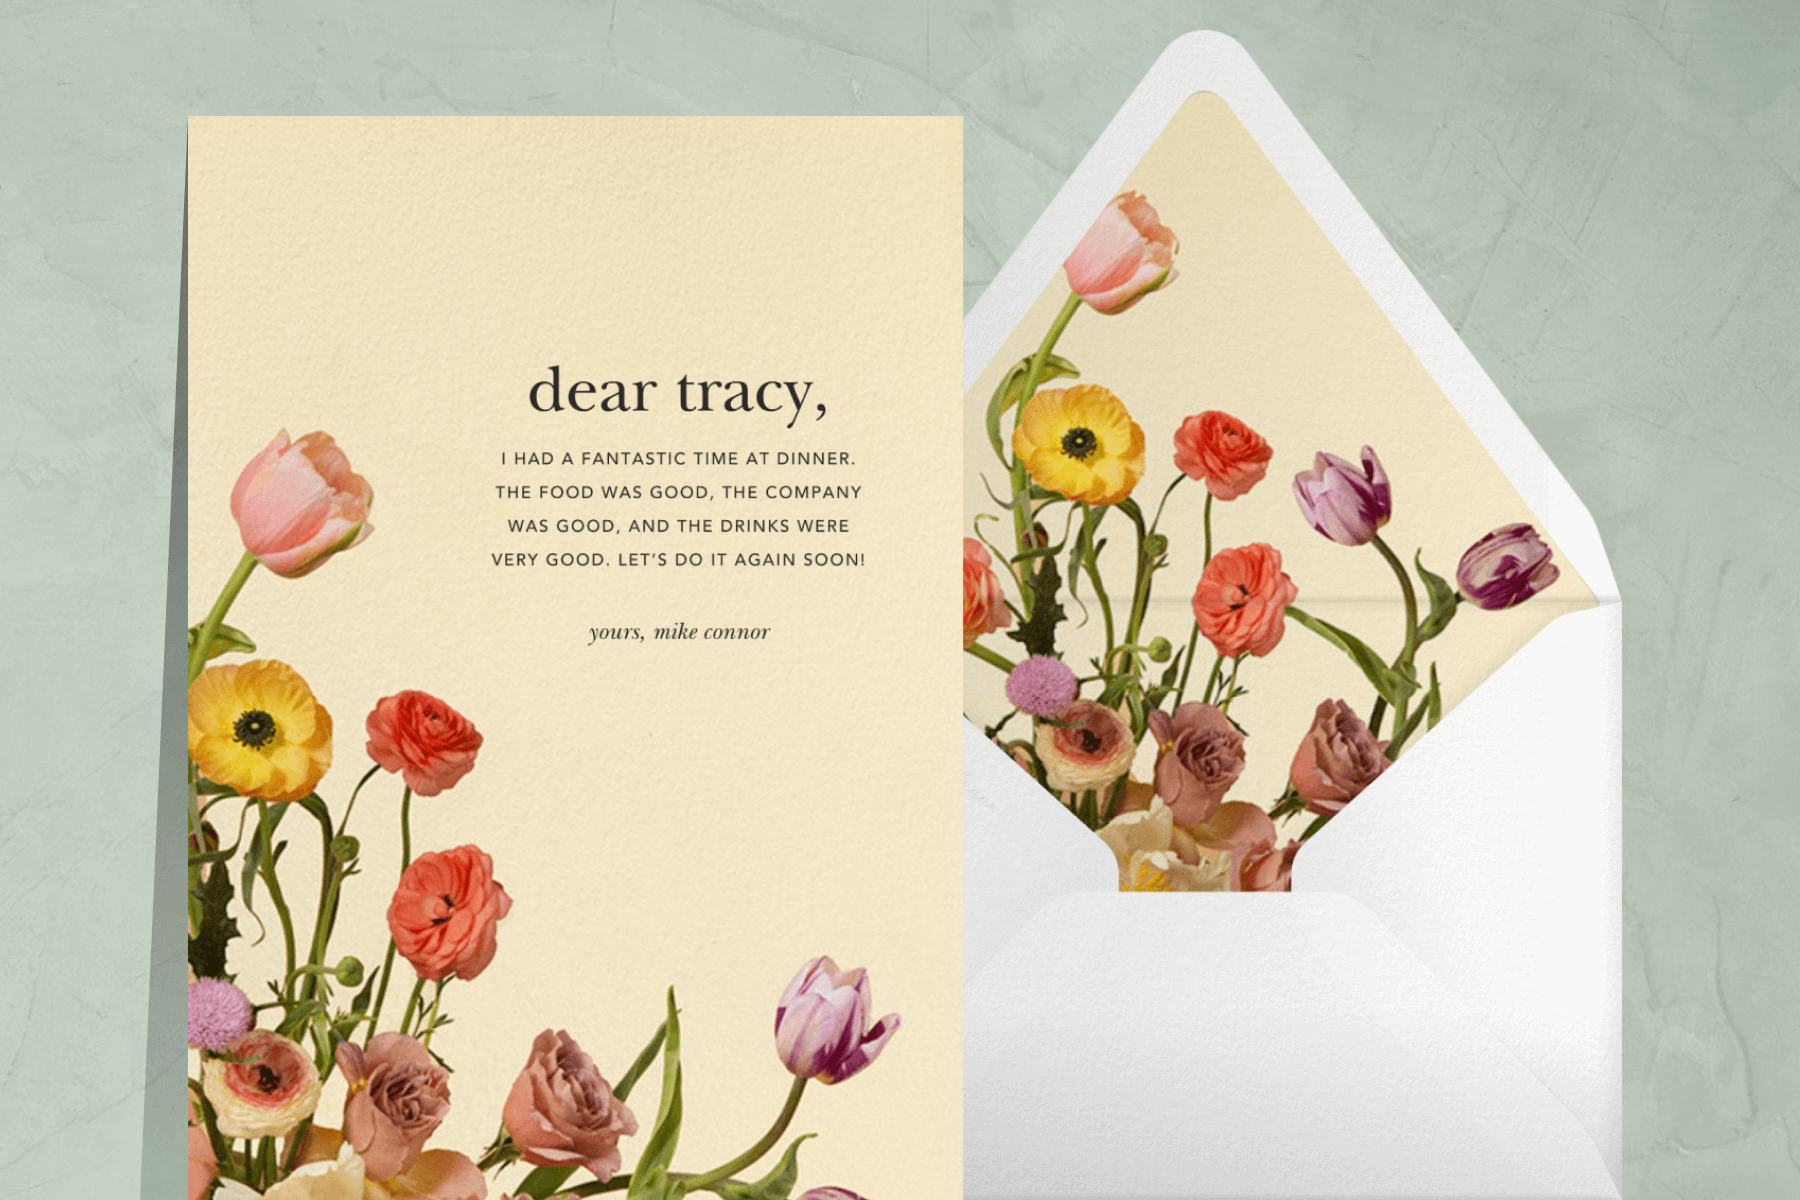 A thank you card with colorful photo-realistic flowers sprouting from the bottom left corner.